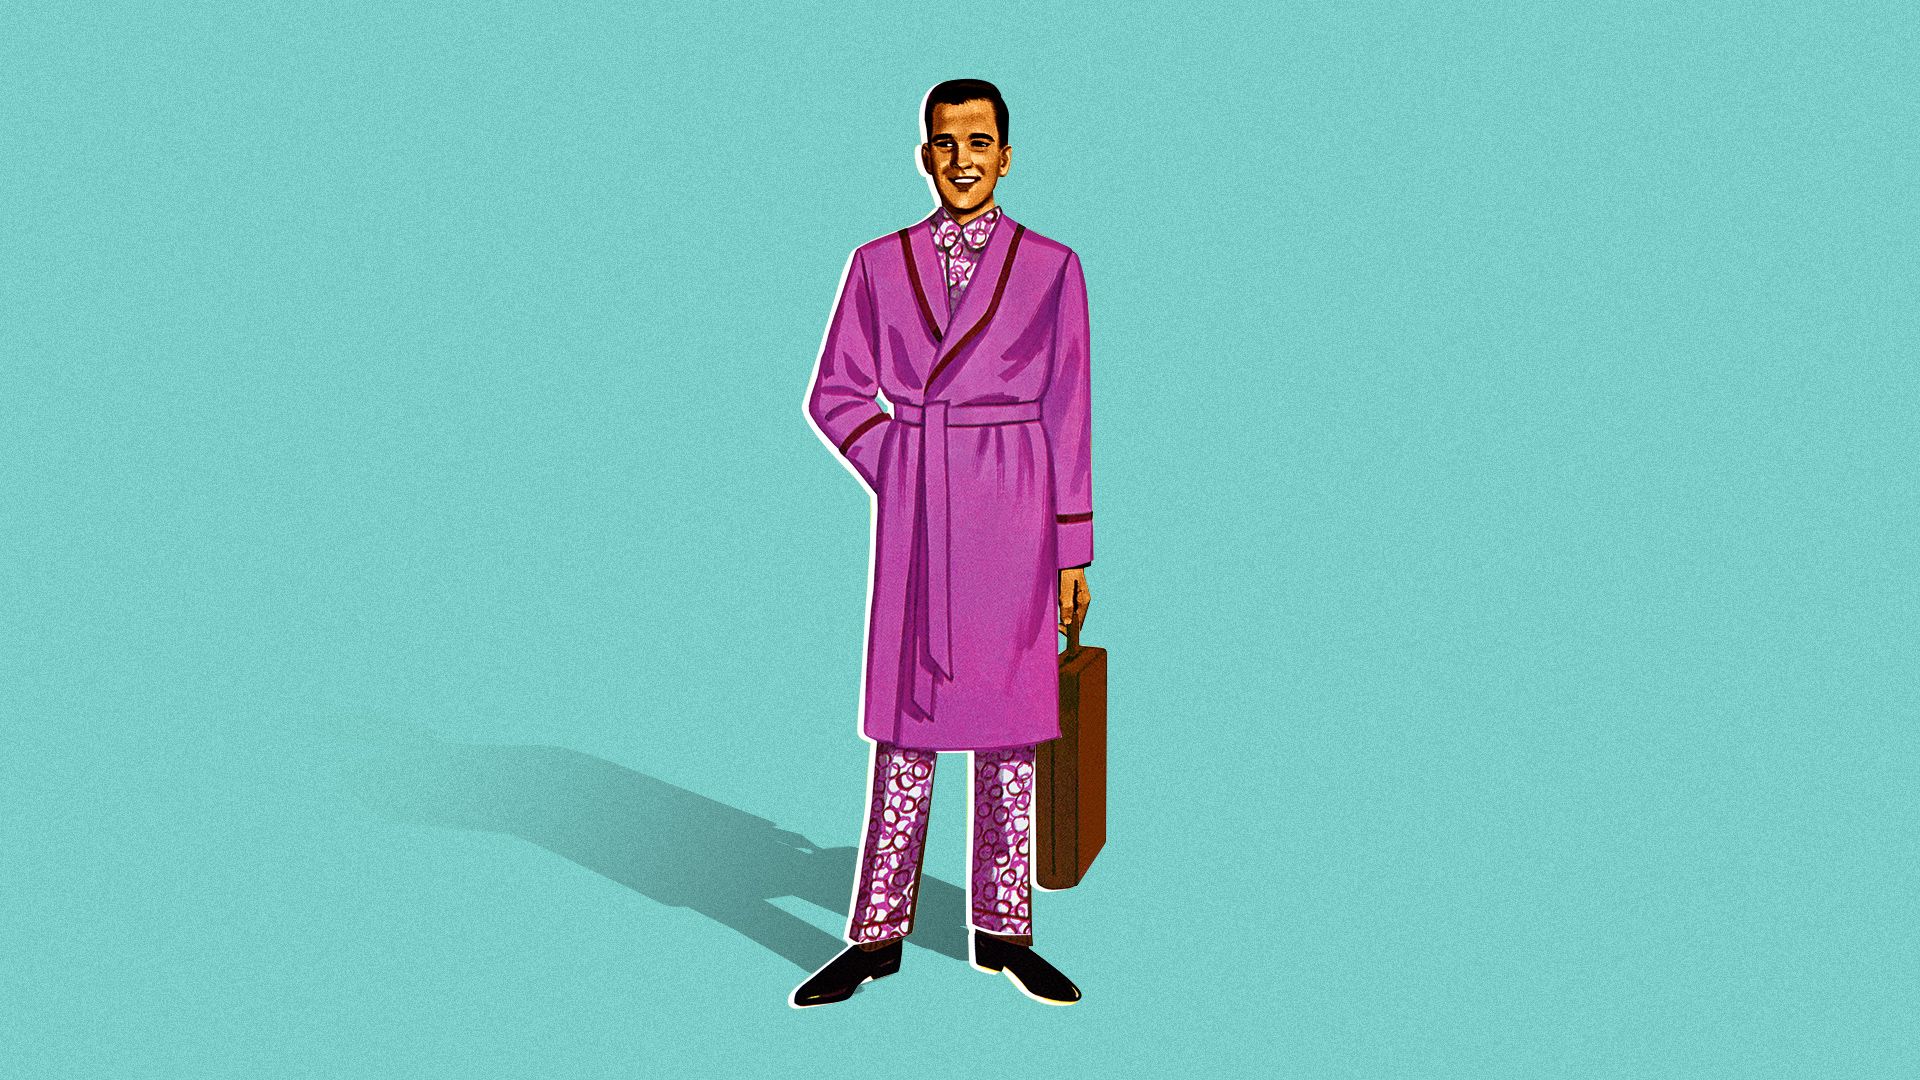 Illustration of a man in a bathrobe with a briefcase done in 50s mid century modern illustration style